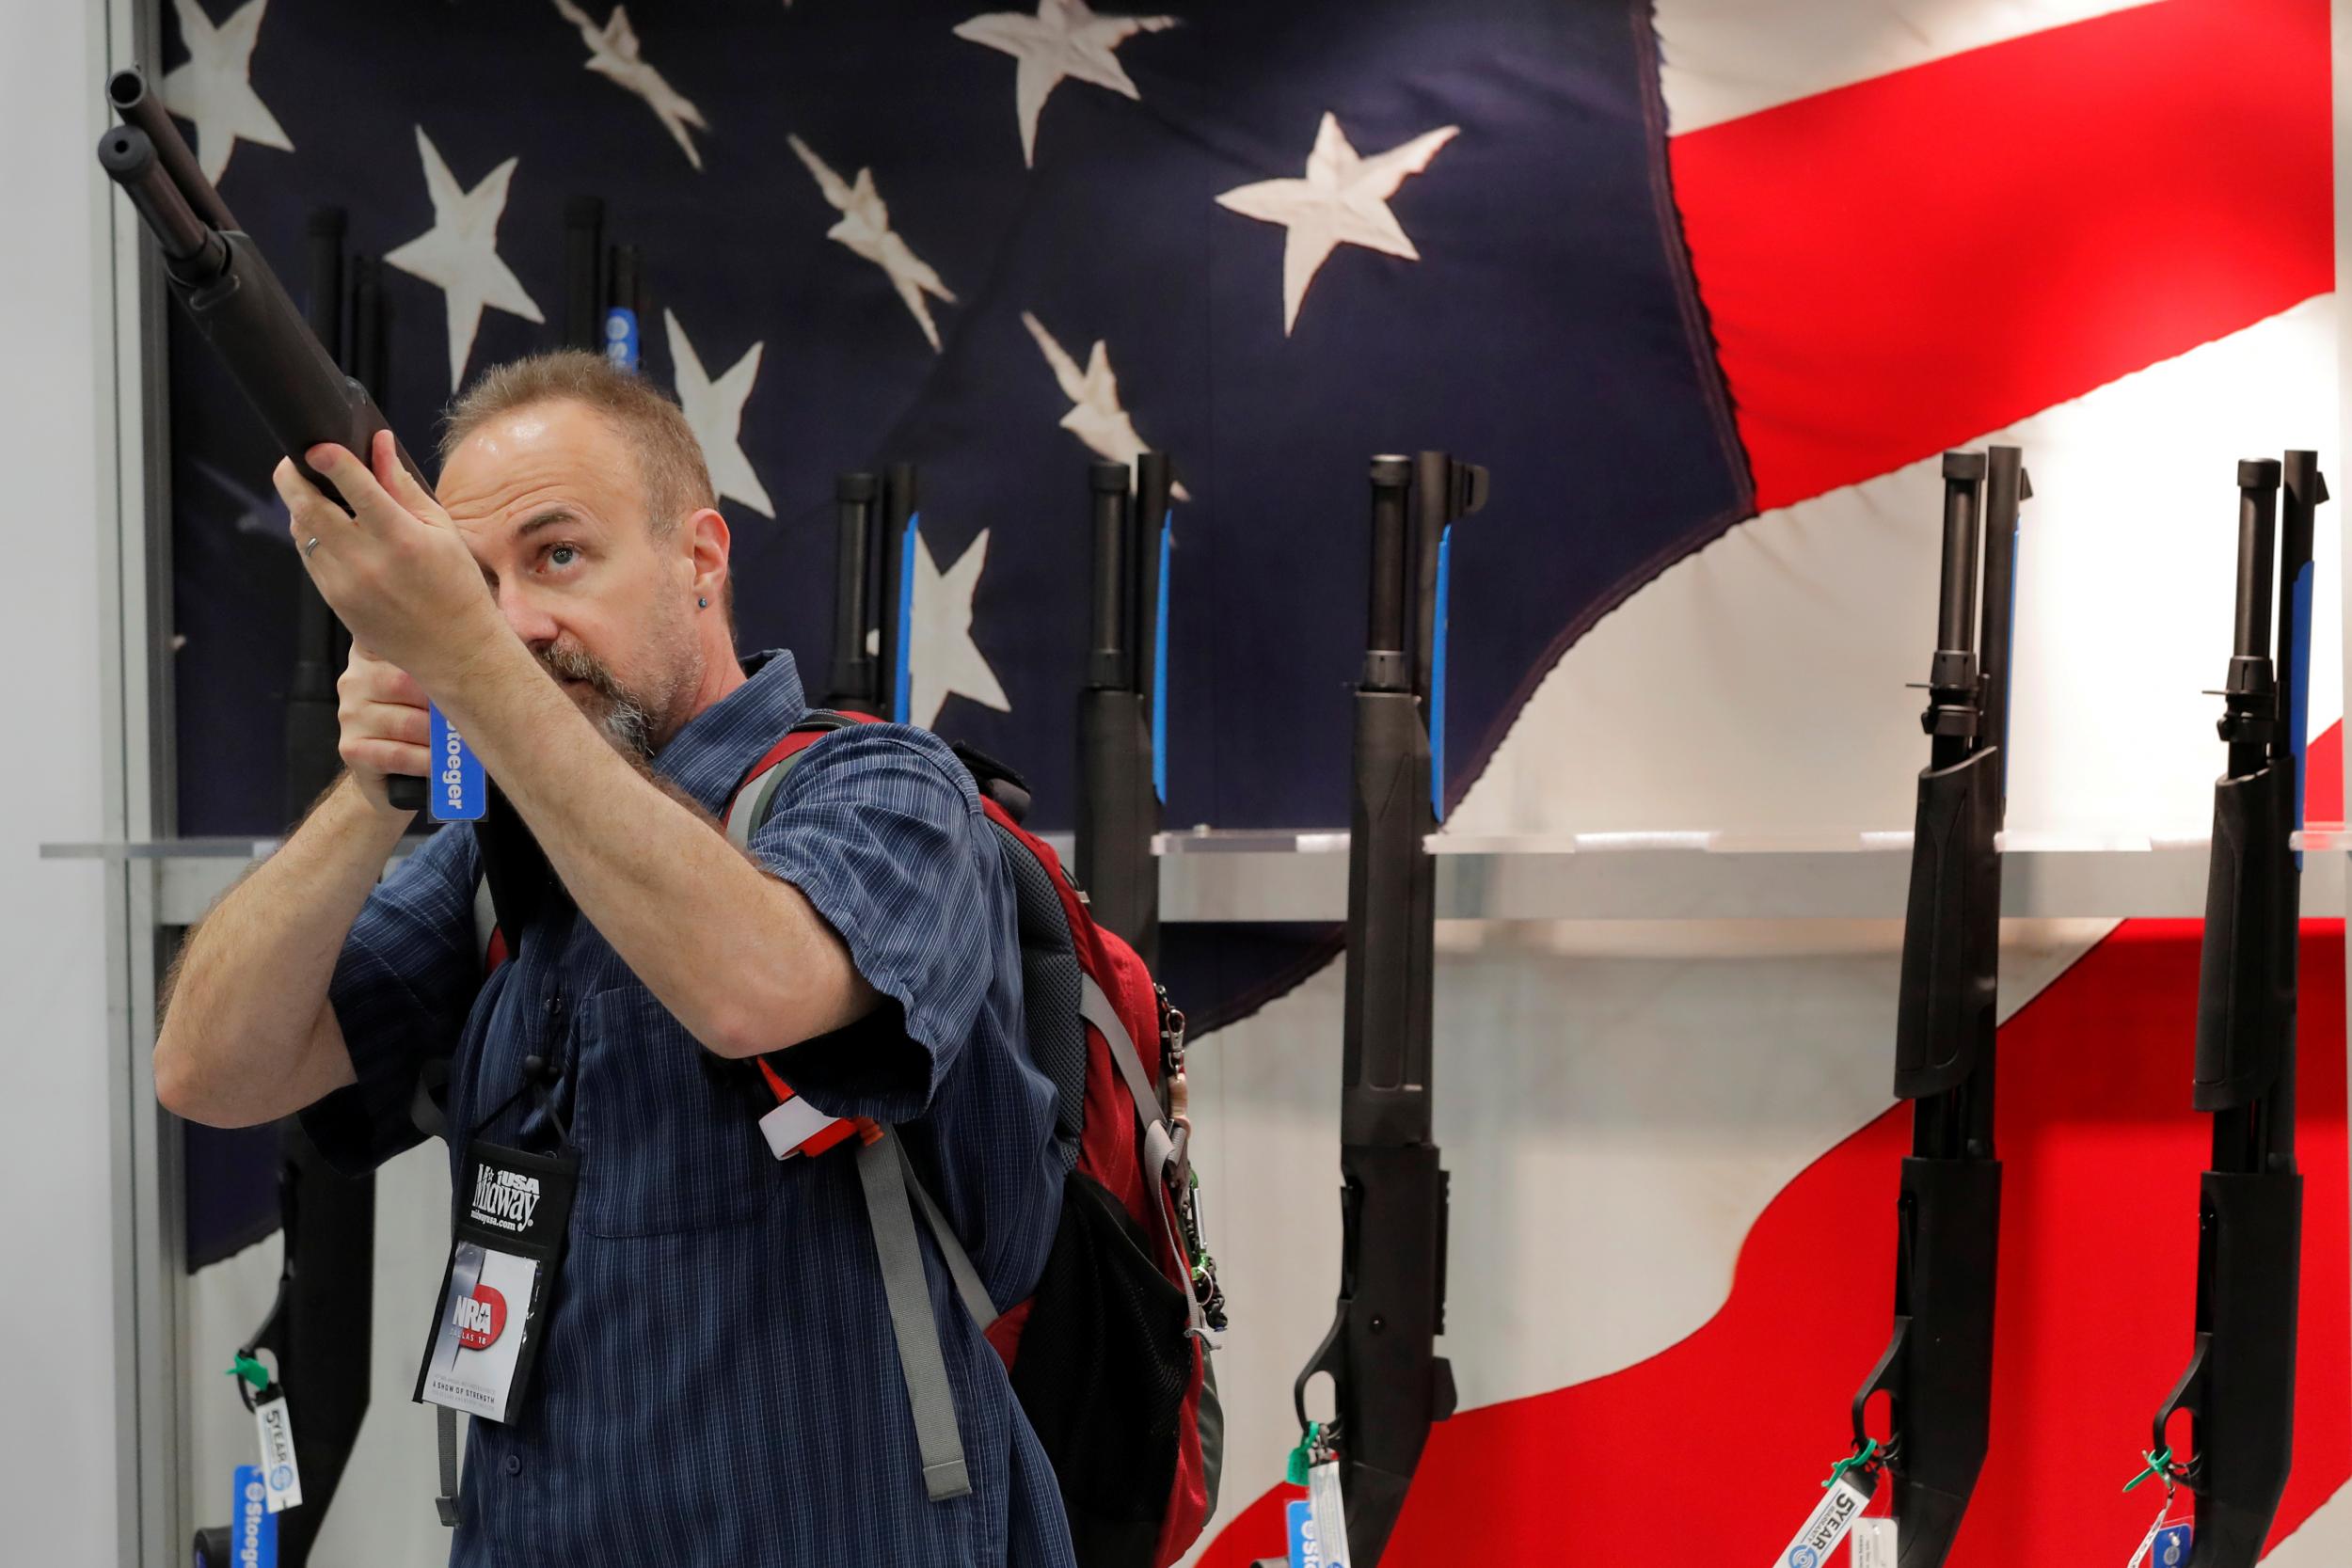 A gun enthusiast looks at a shotgun during the annual National Rifle Association (NRA) convention in Dallas, Texas, U.S., May 5, 2018.